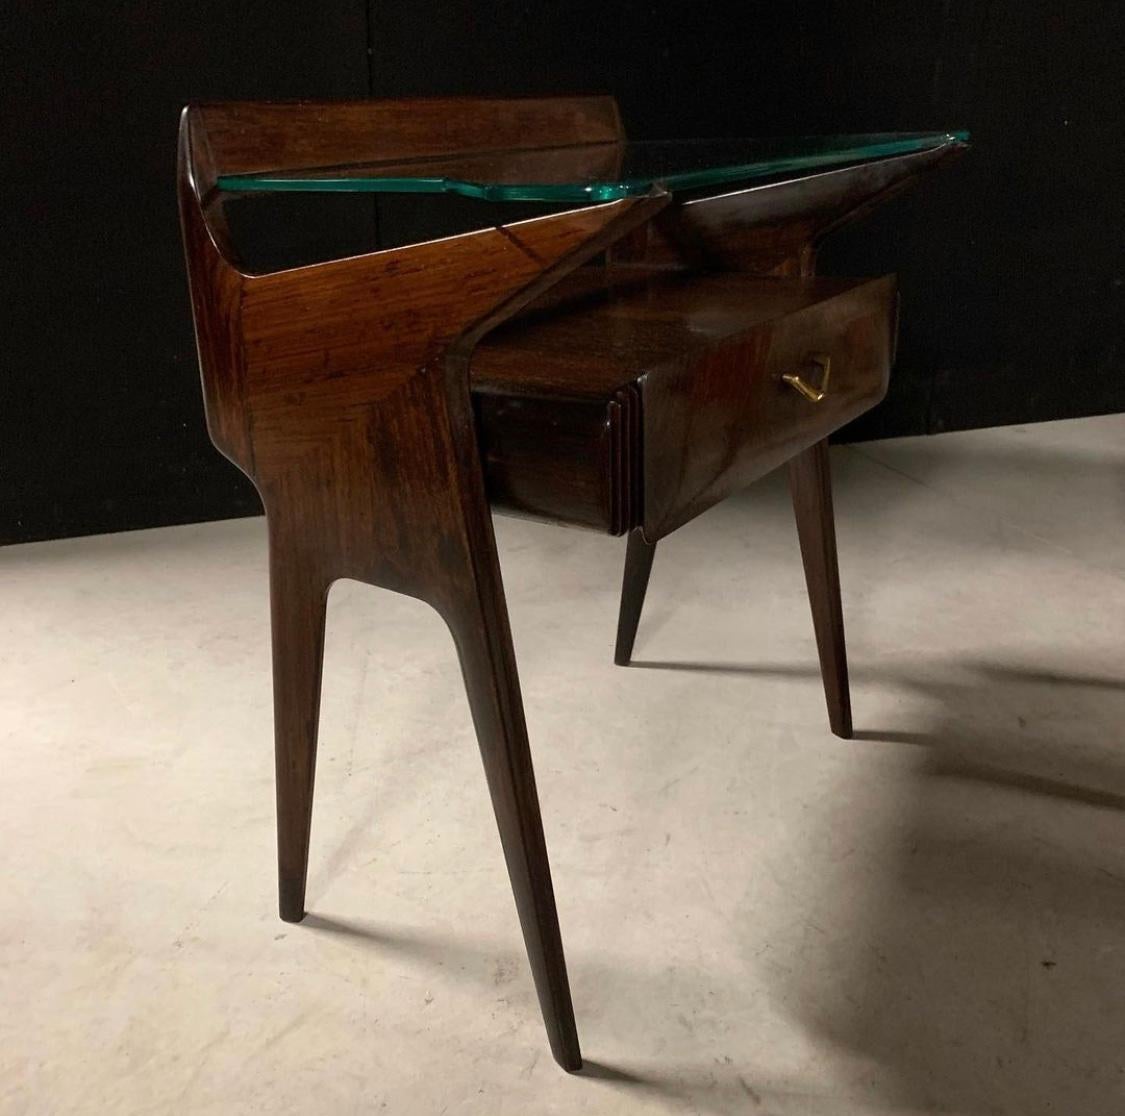 Pair of bedside tables in the manner of Ico Parisi and Vittorio Dassi.

Featuring split level glass and wood tabletops

Single drawer with etched ribbing at sides. V-shaped pull handle in brass. 

Glass shelf sits within channel at back